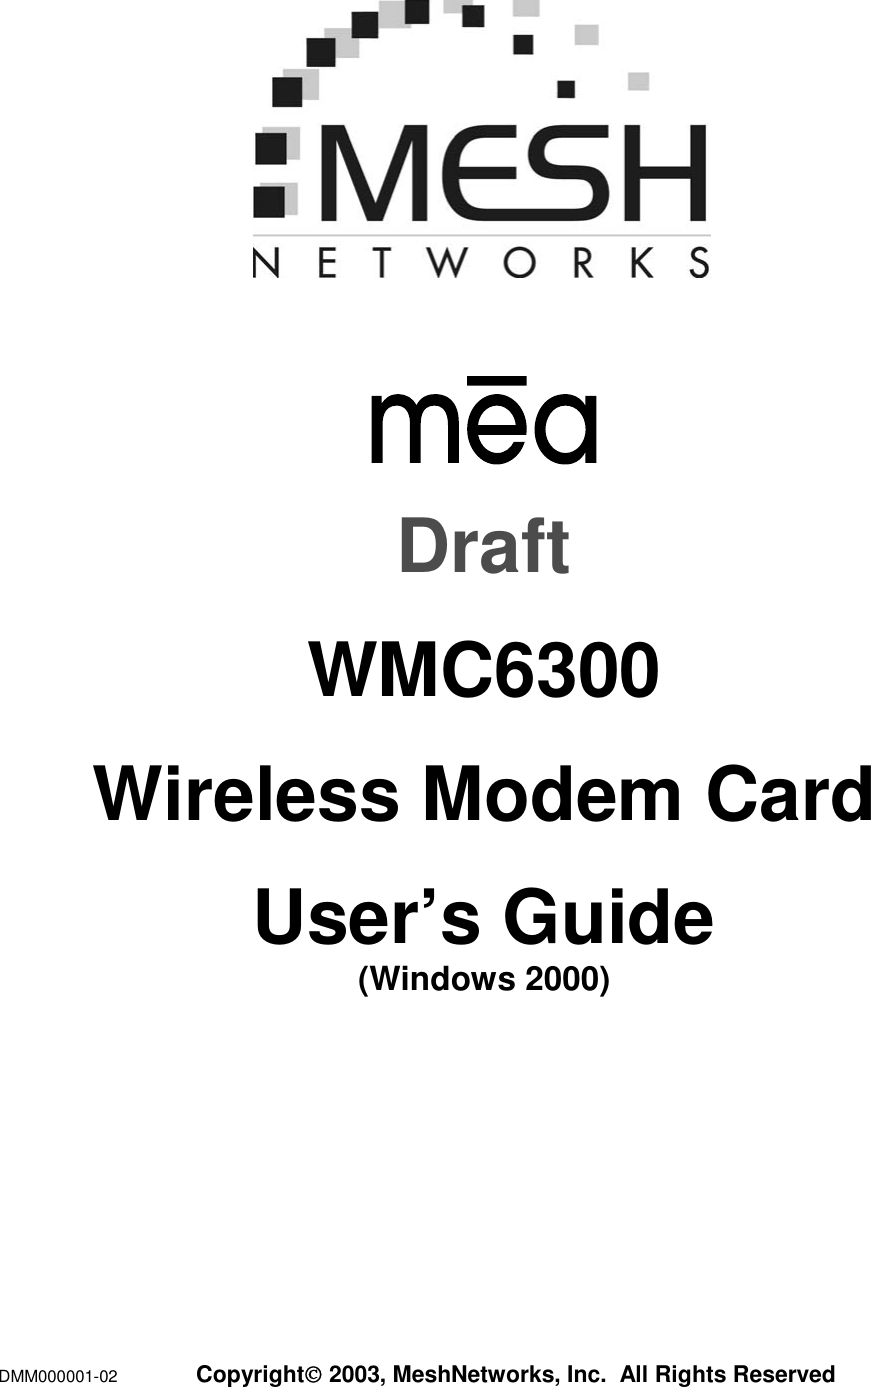  DMM000001-02  Copyright 2003, MeshNetworks, Inc.  All Rights Reserved         Draft WMC6300 Wireless Modem Card User’s Guide (Windows 2000) 